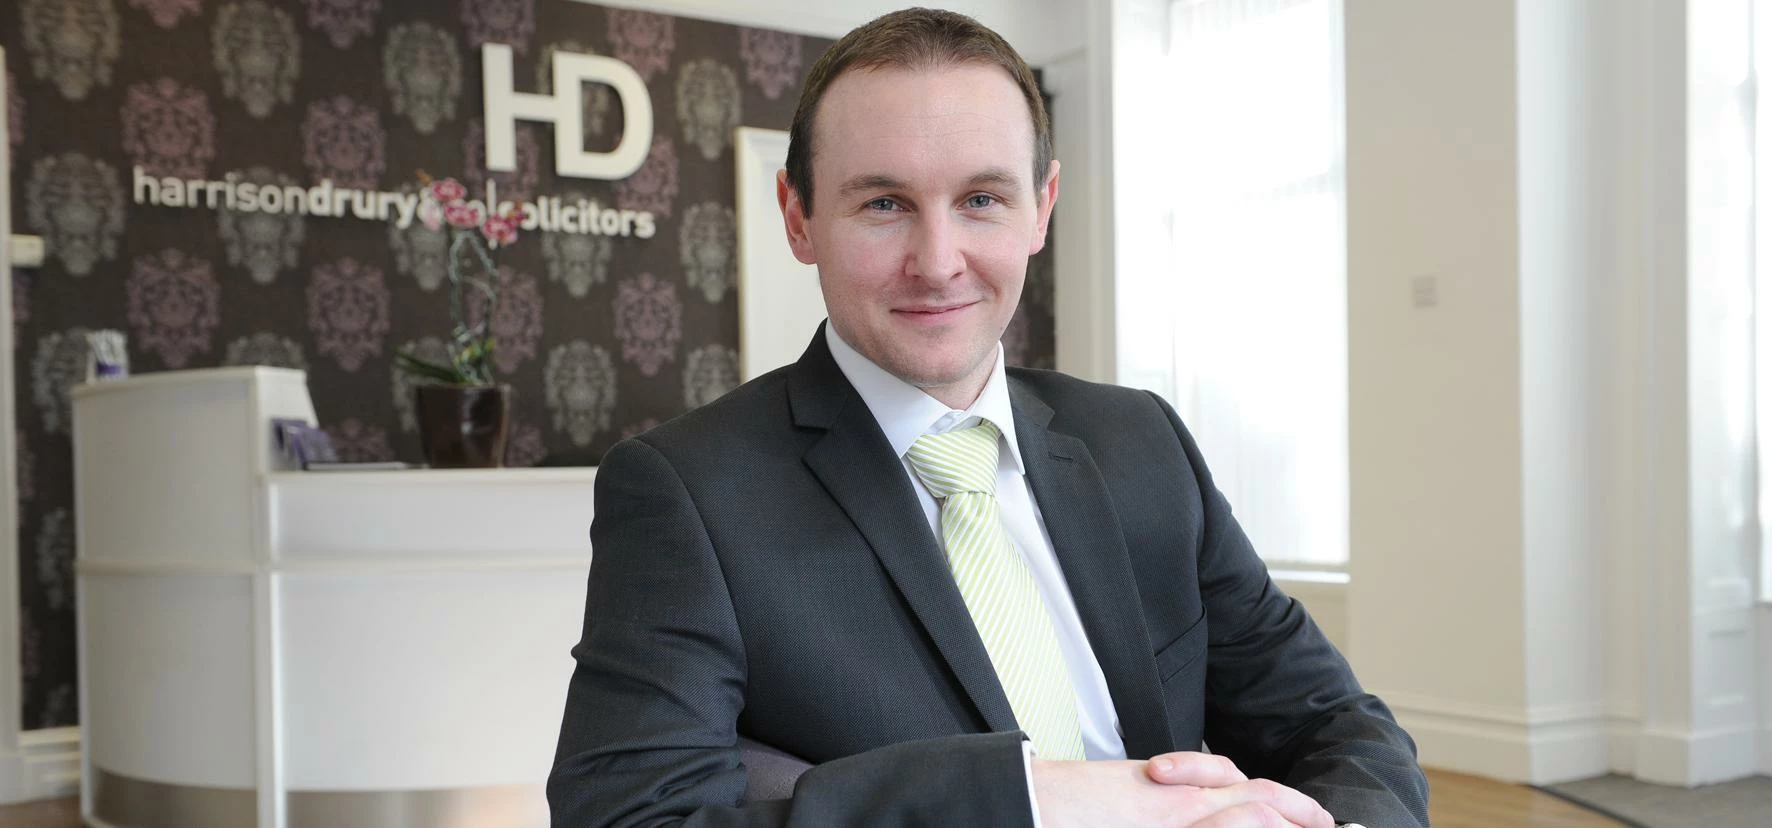 Nick Booth a commercial litigation lawyer at Harrison Drury